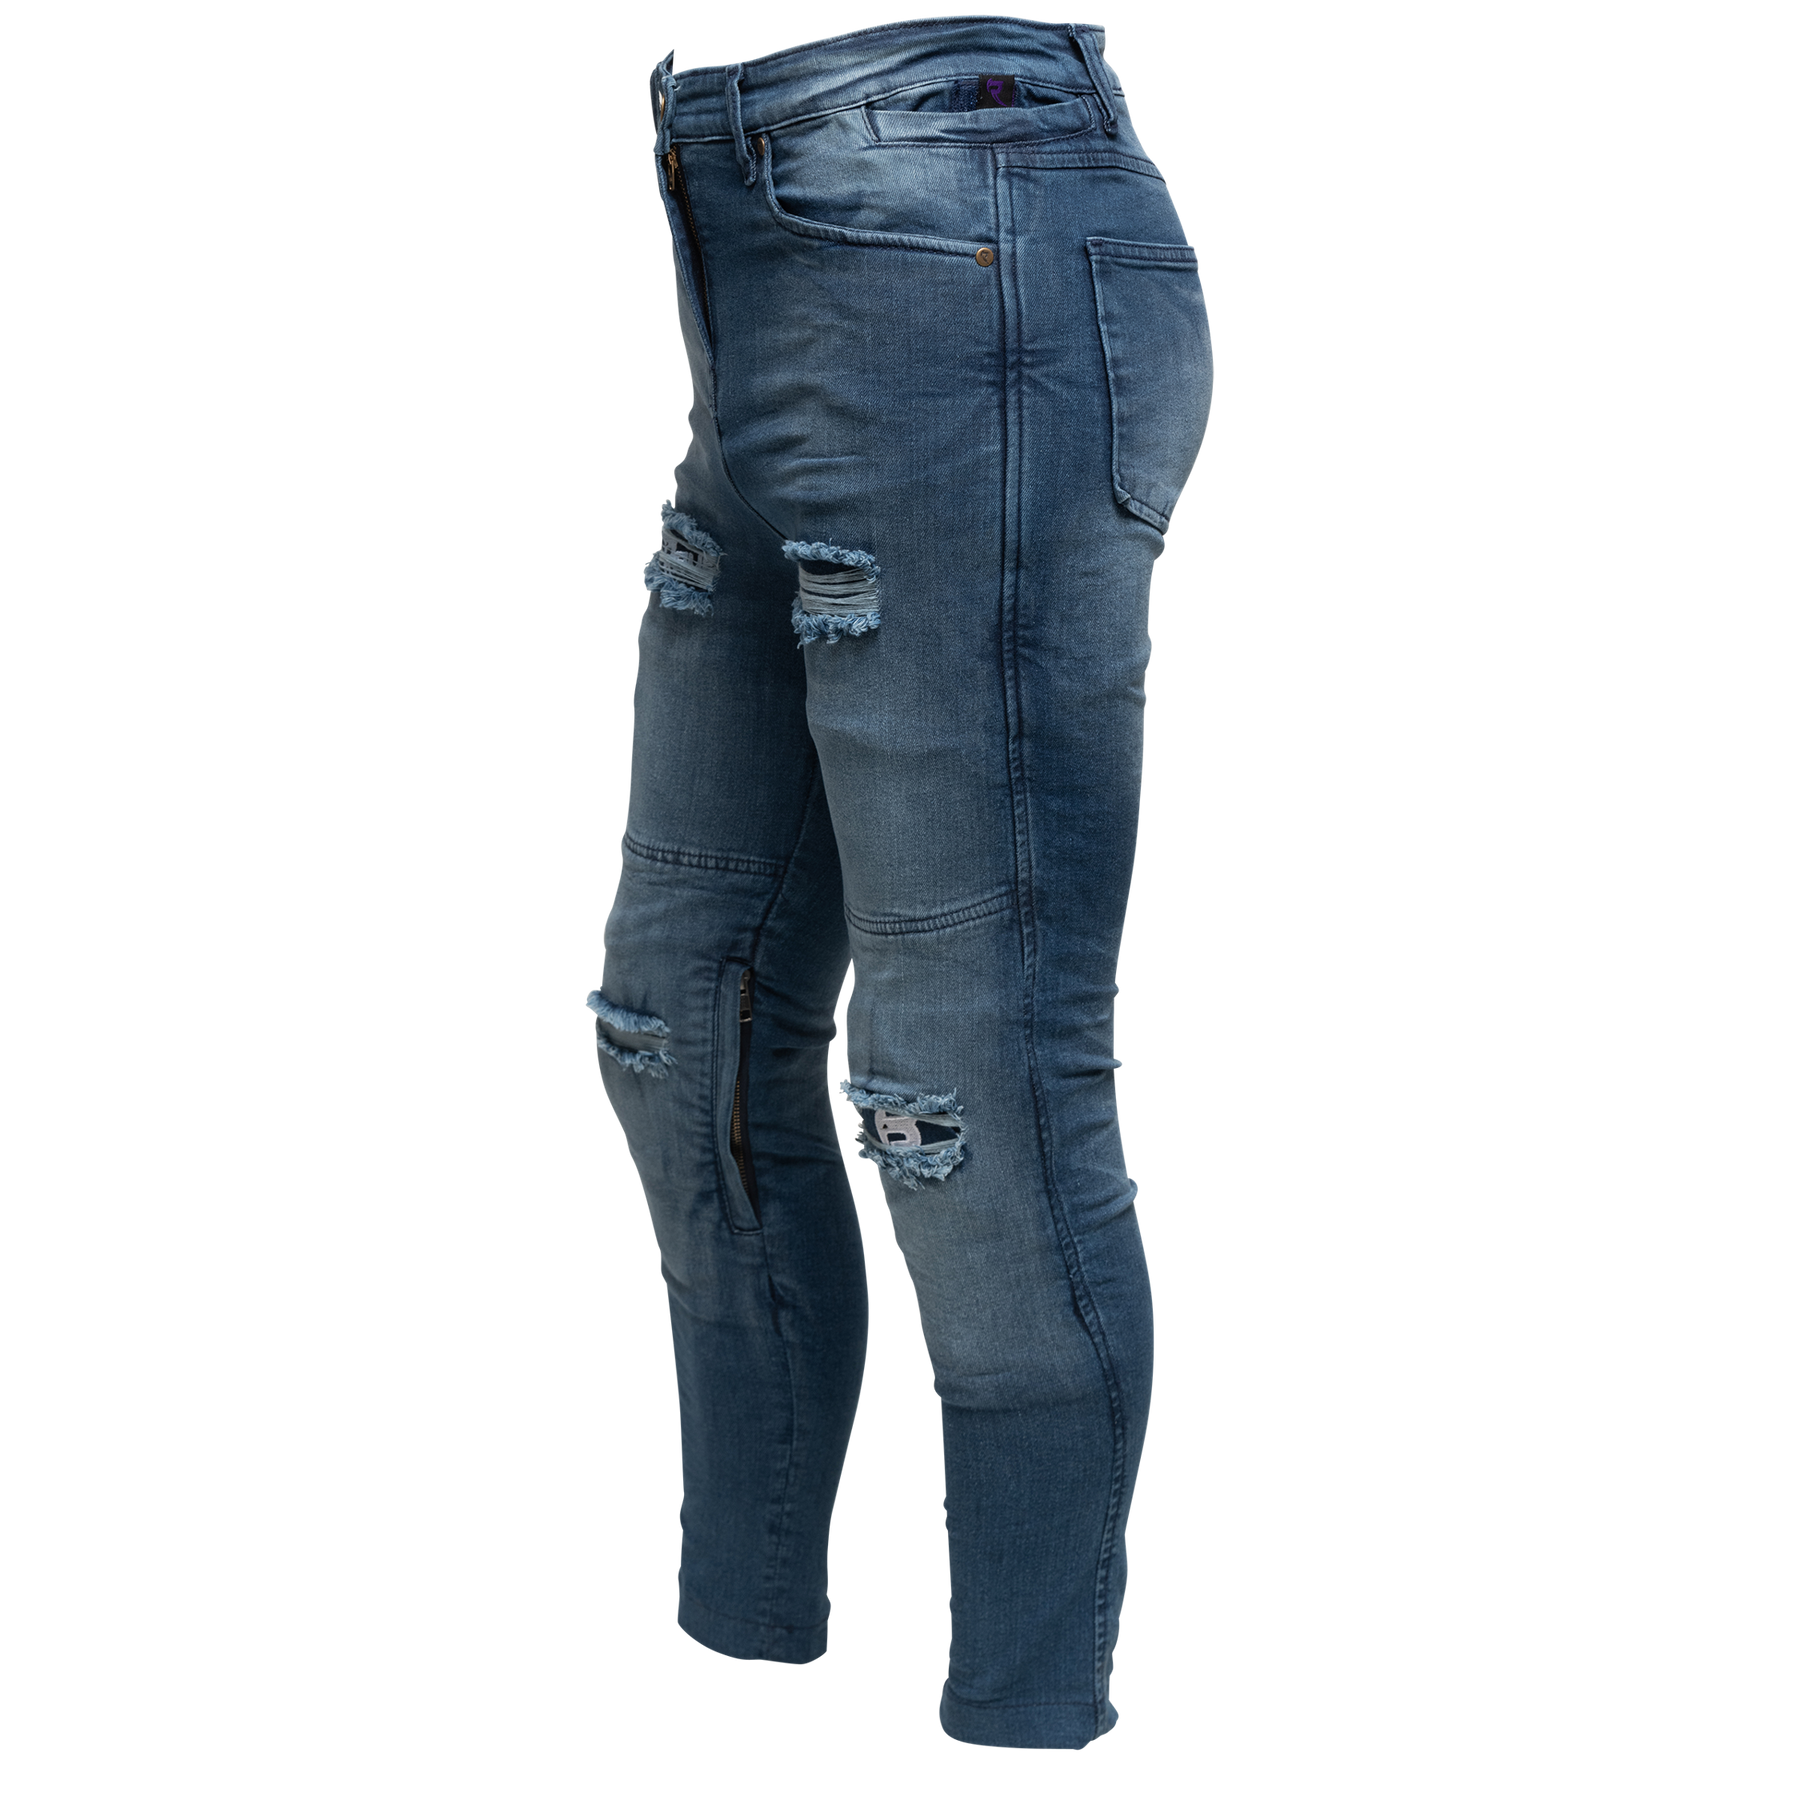 RAVEN Moto - Motorcycle Jeans  Women's High-Waisted REVOLT Ripped Armored  Jeans